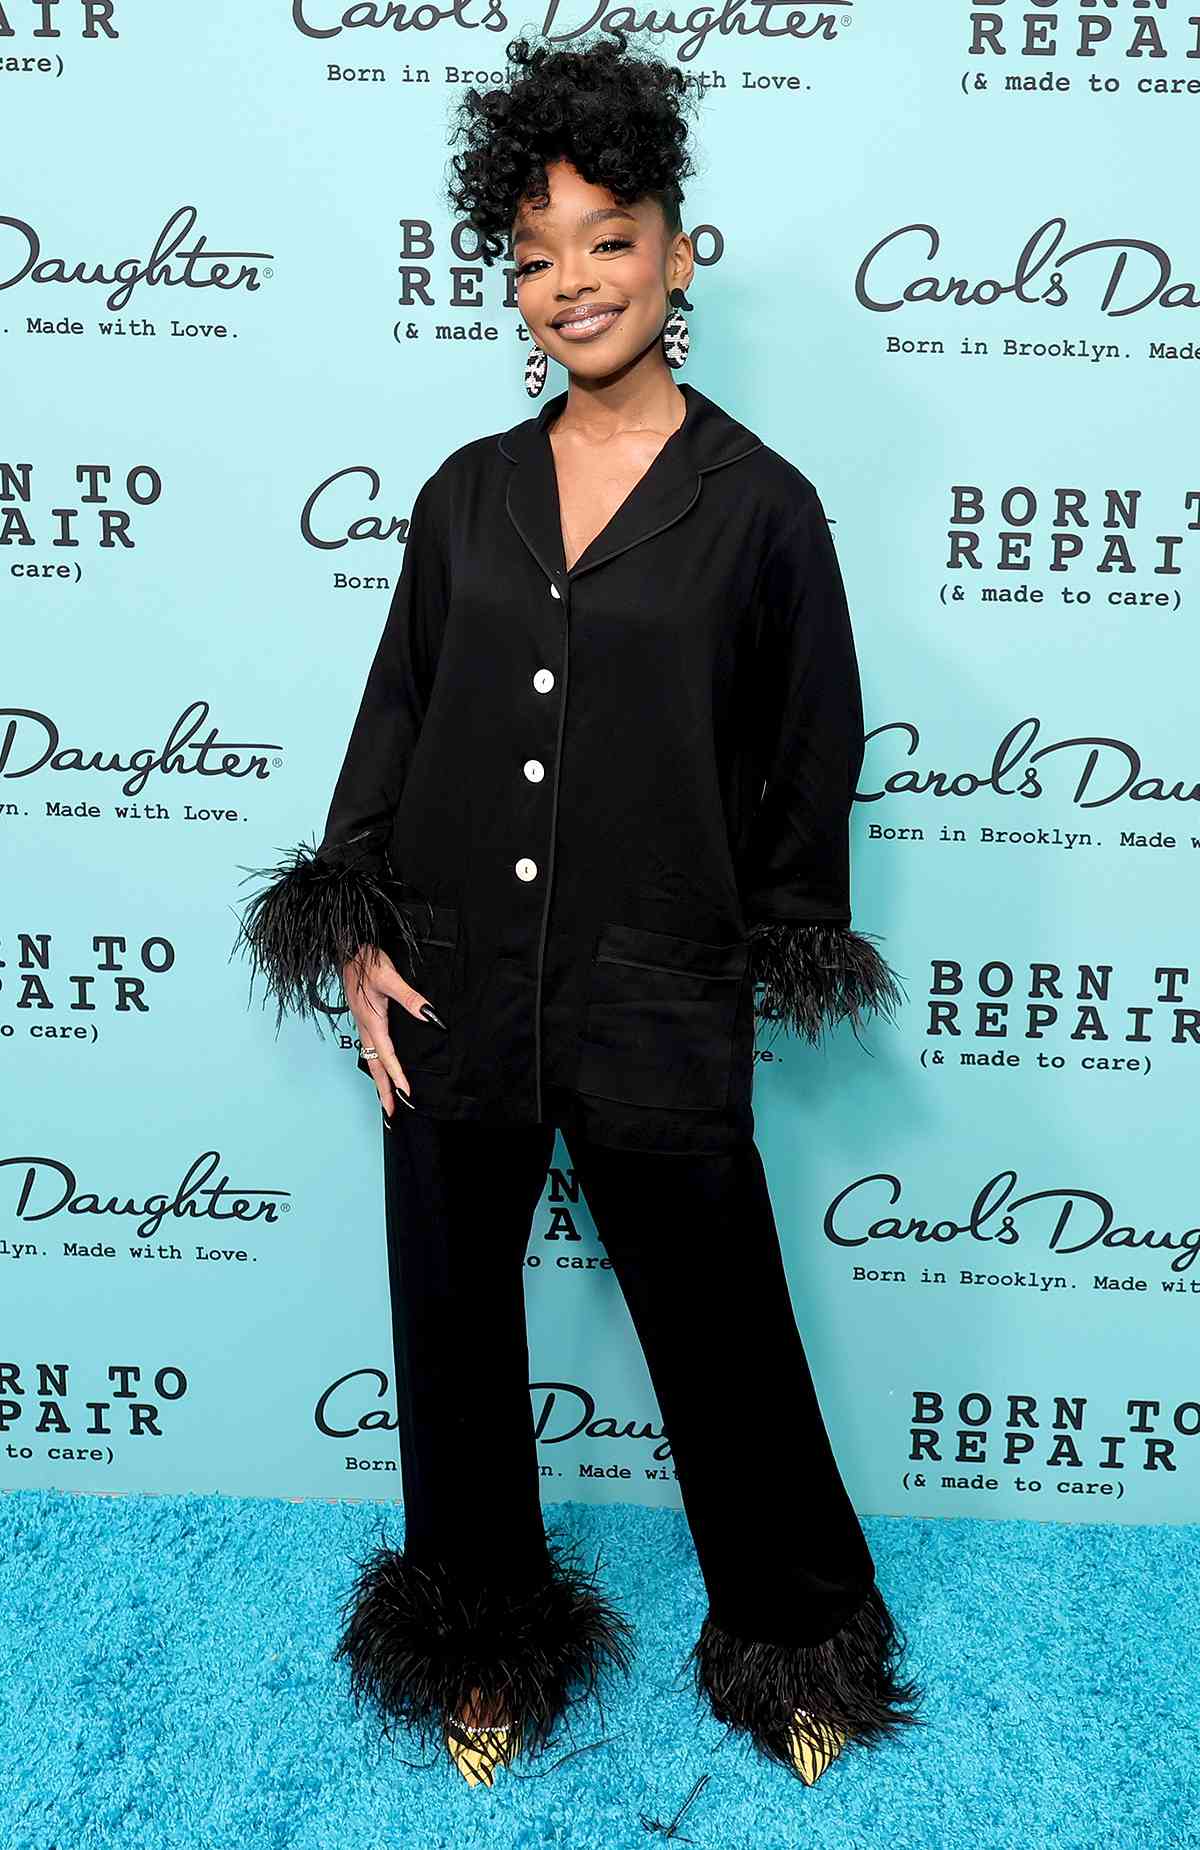 Marsai Martin attends as Carol's Daughter celebrates the launch of their brand new collection, Born To Repair (& Made To Care) at Bogart House on February 07, 2023 in Brooklyn, New York.